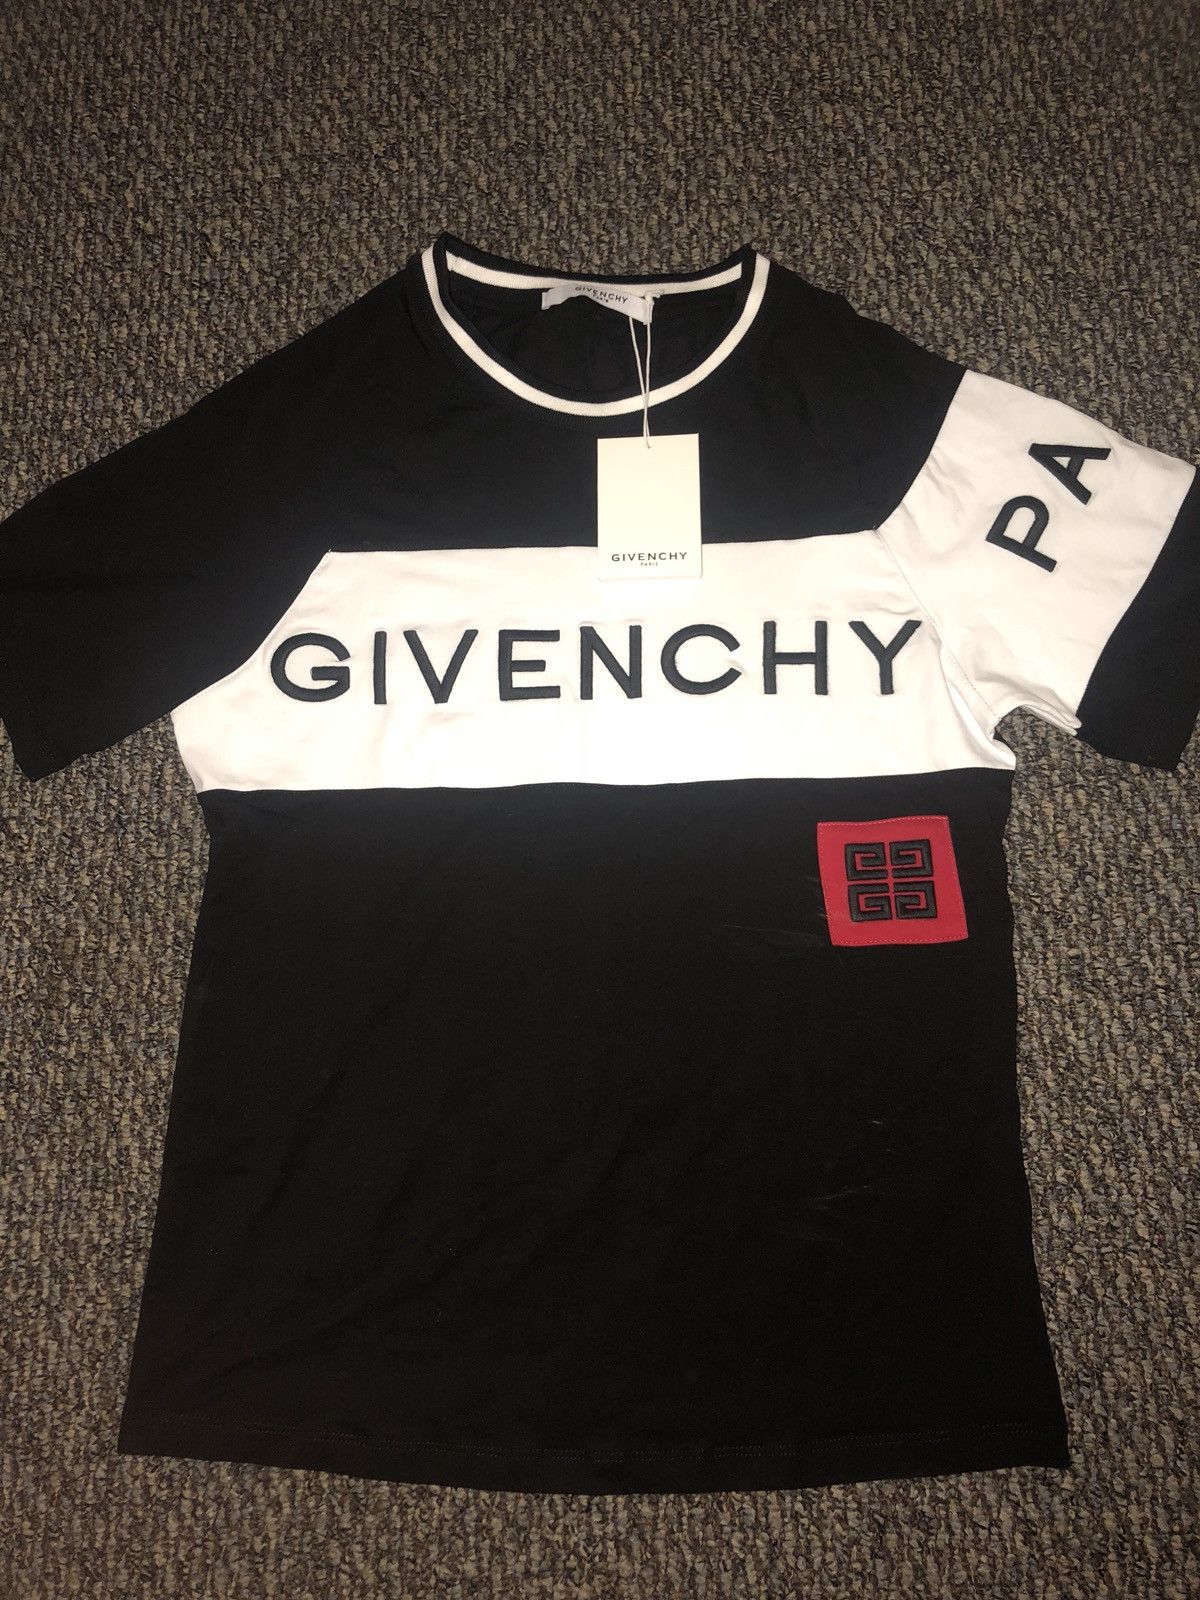 Givenchy GIVENCHY PARIS 4G EMBROIDERED T-SHIRT Size US S / EU 44-46 / 1 - 1 Preview